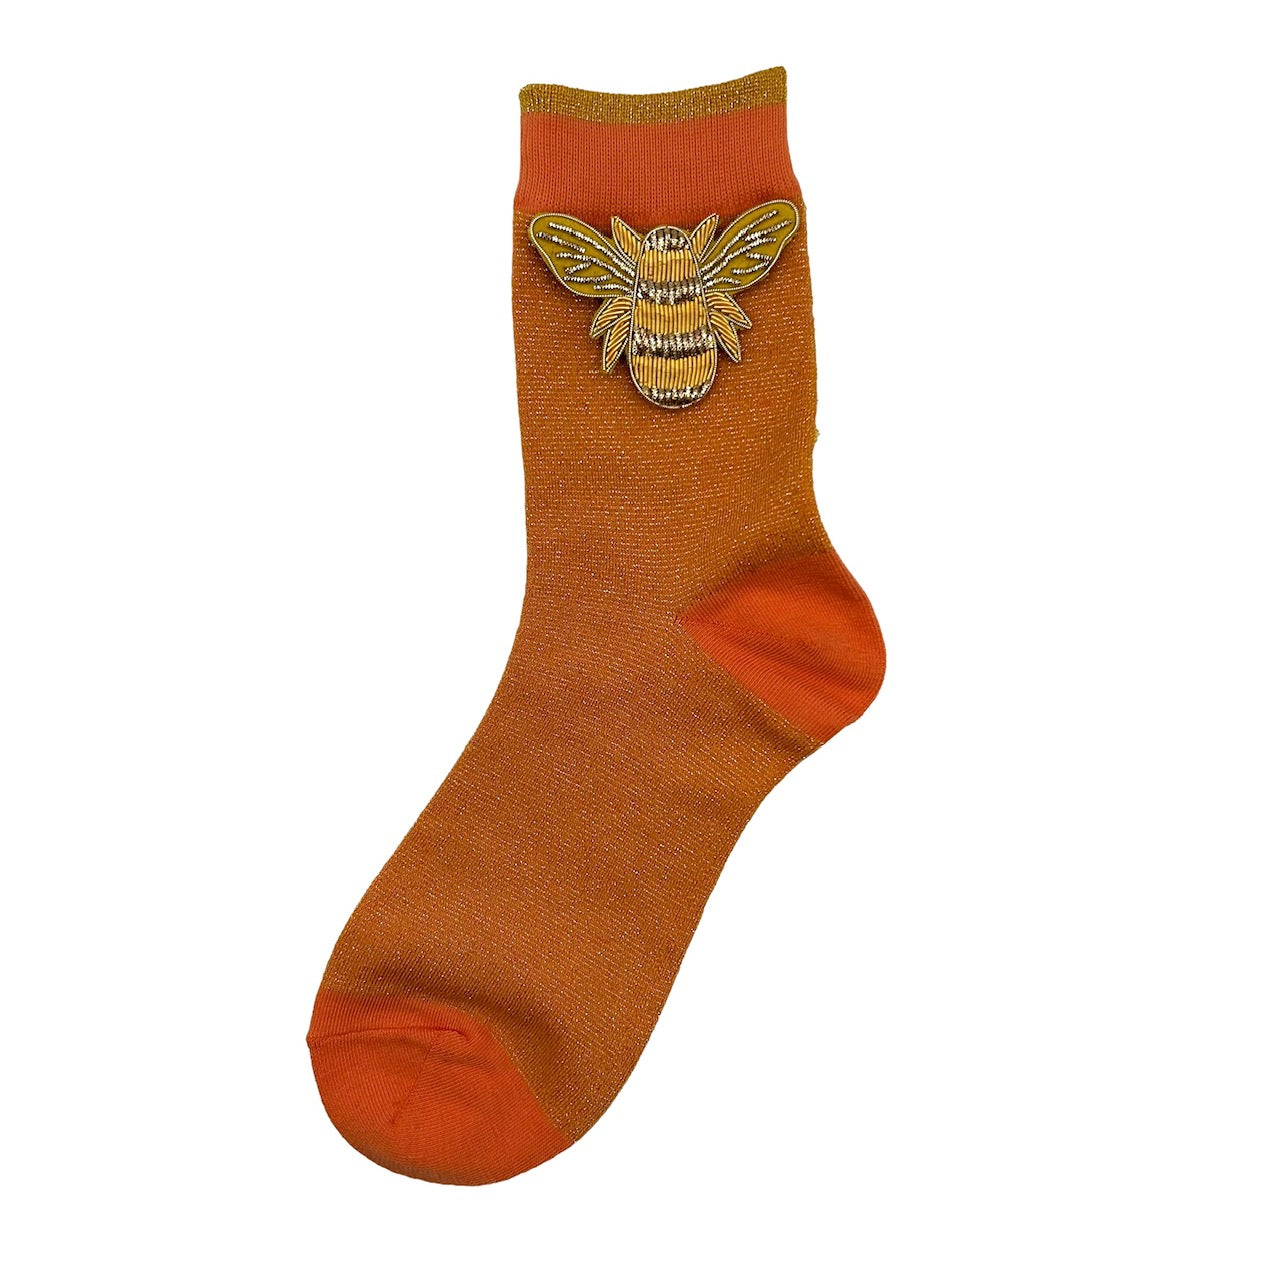 Tokyo socks in cantaloupe with a gold bee brooch